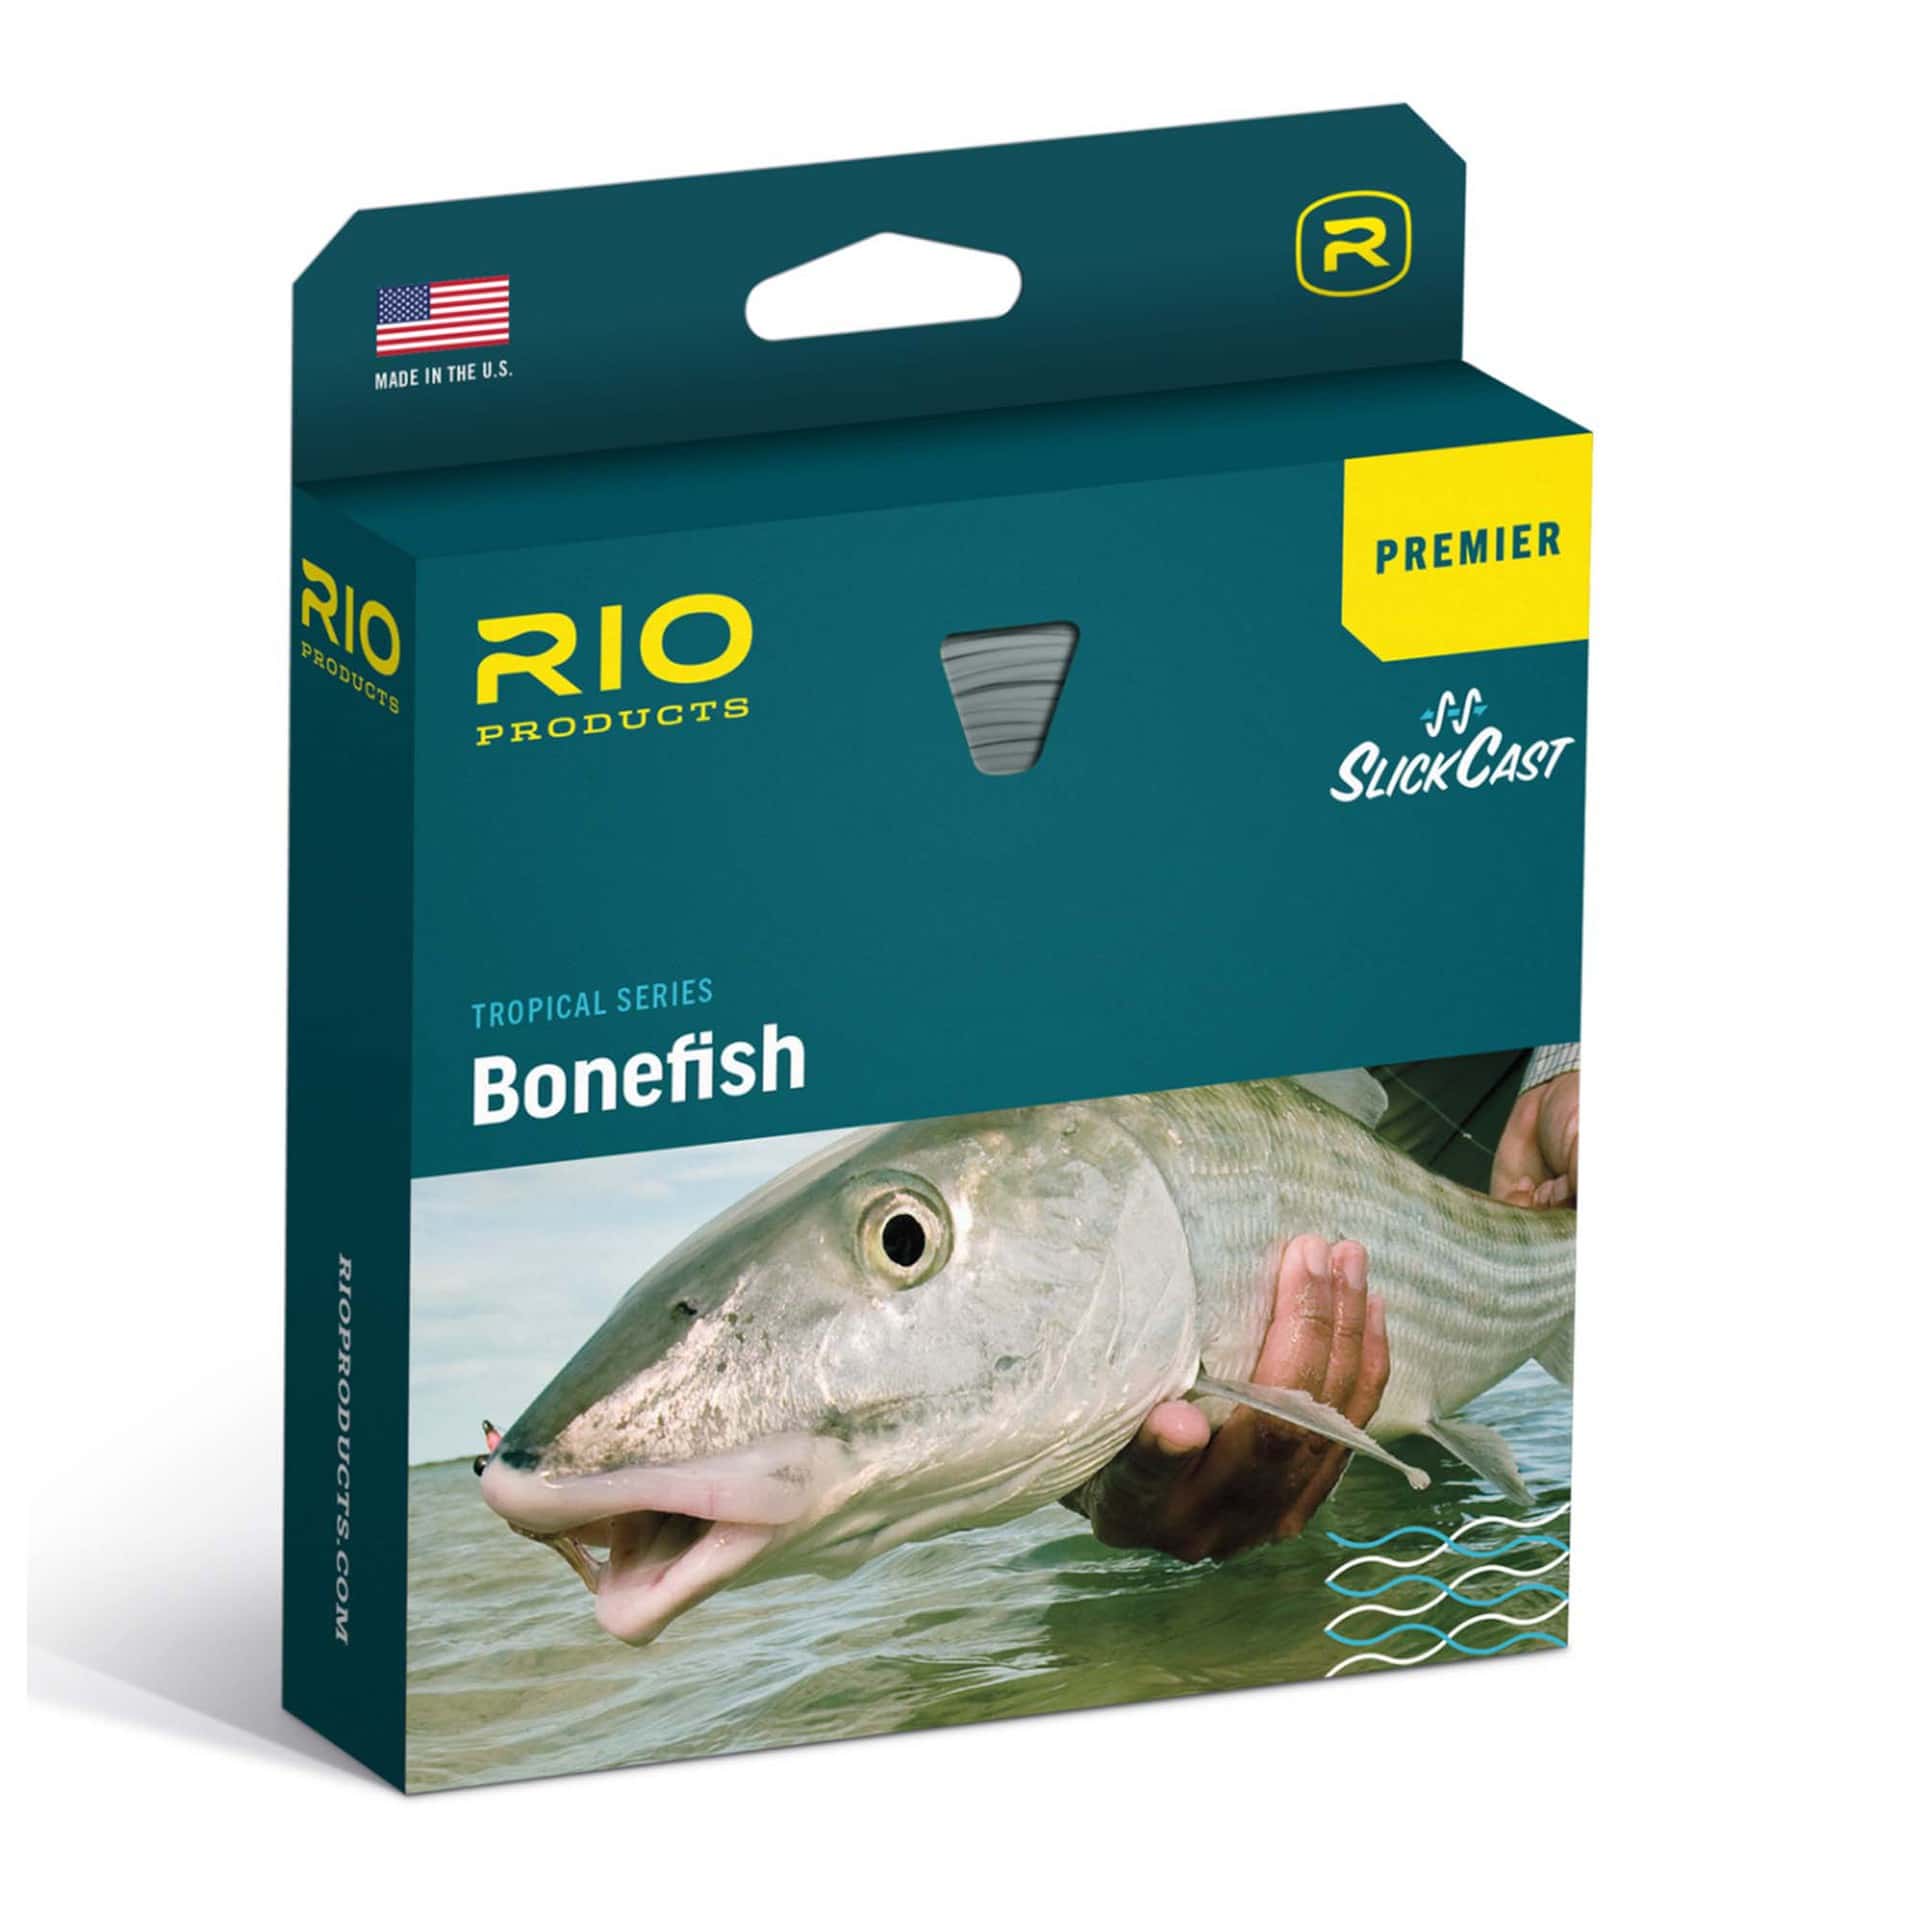 Rio Gold Elite Freshwater Trout Fly Line Floating Slick Cast